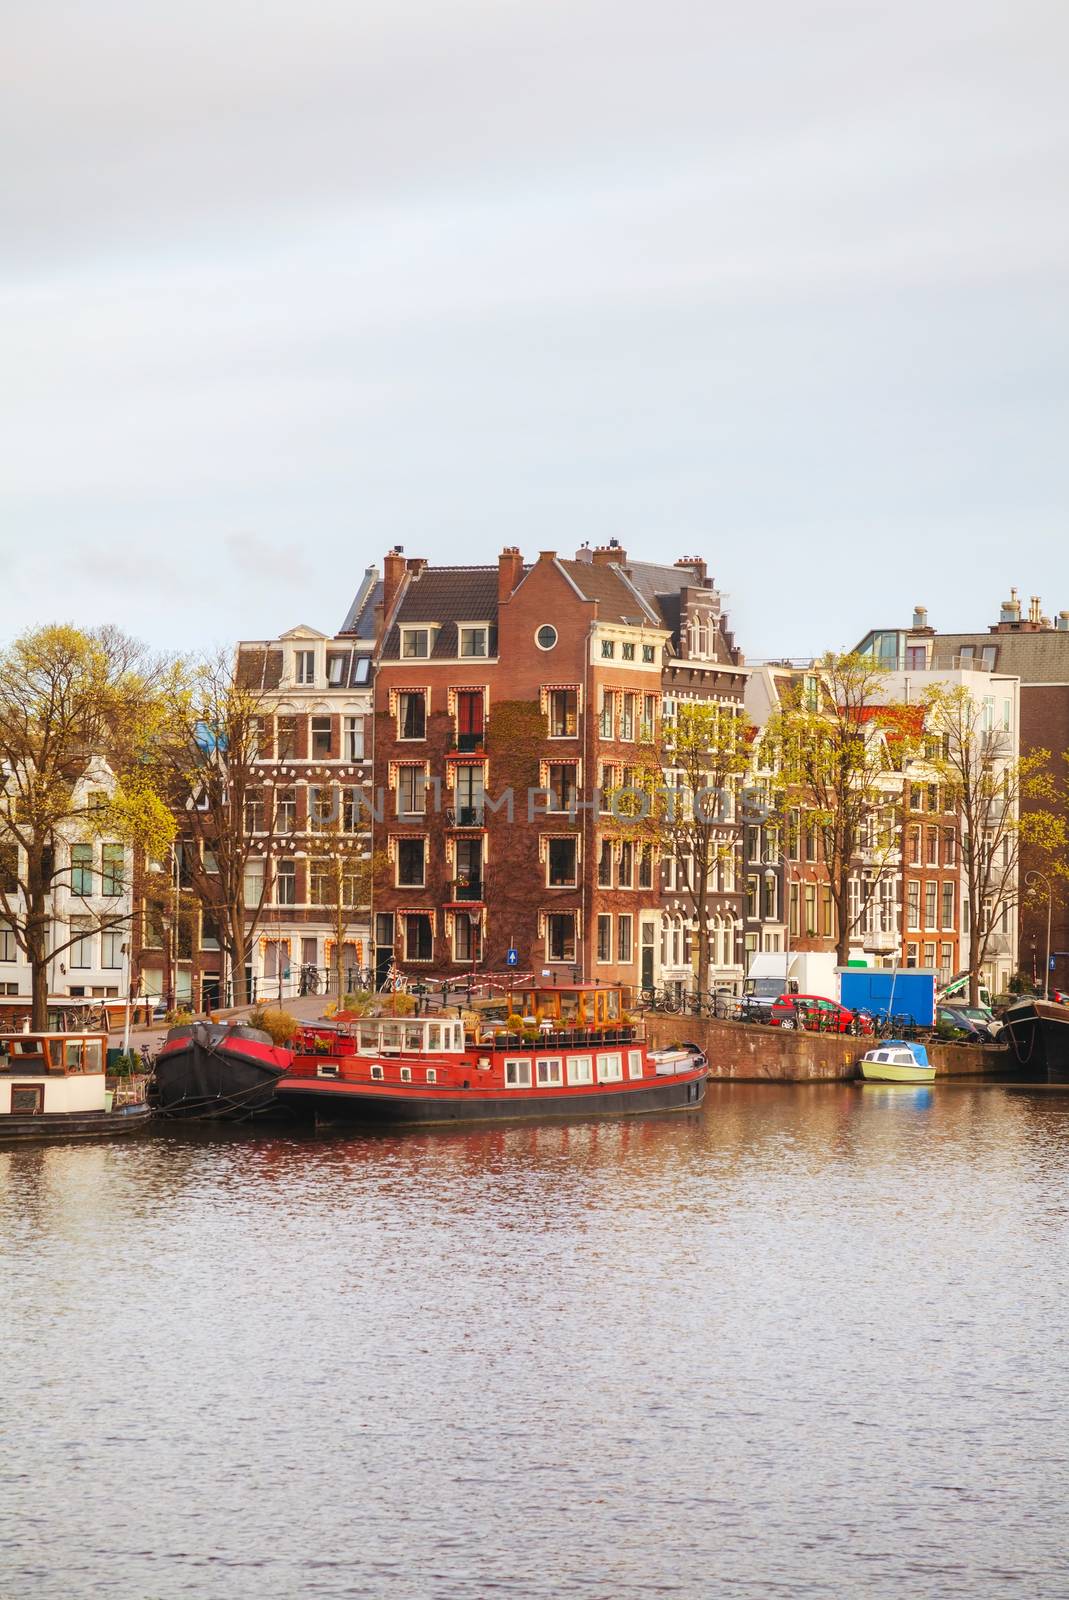 Overview of Amsterdam, the Netherlands by AndreyKr